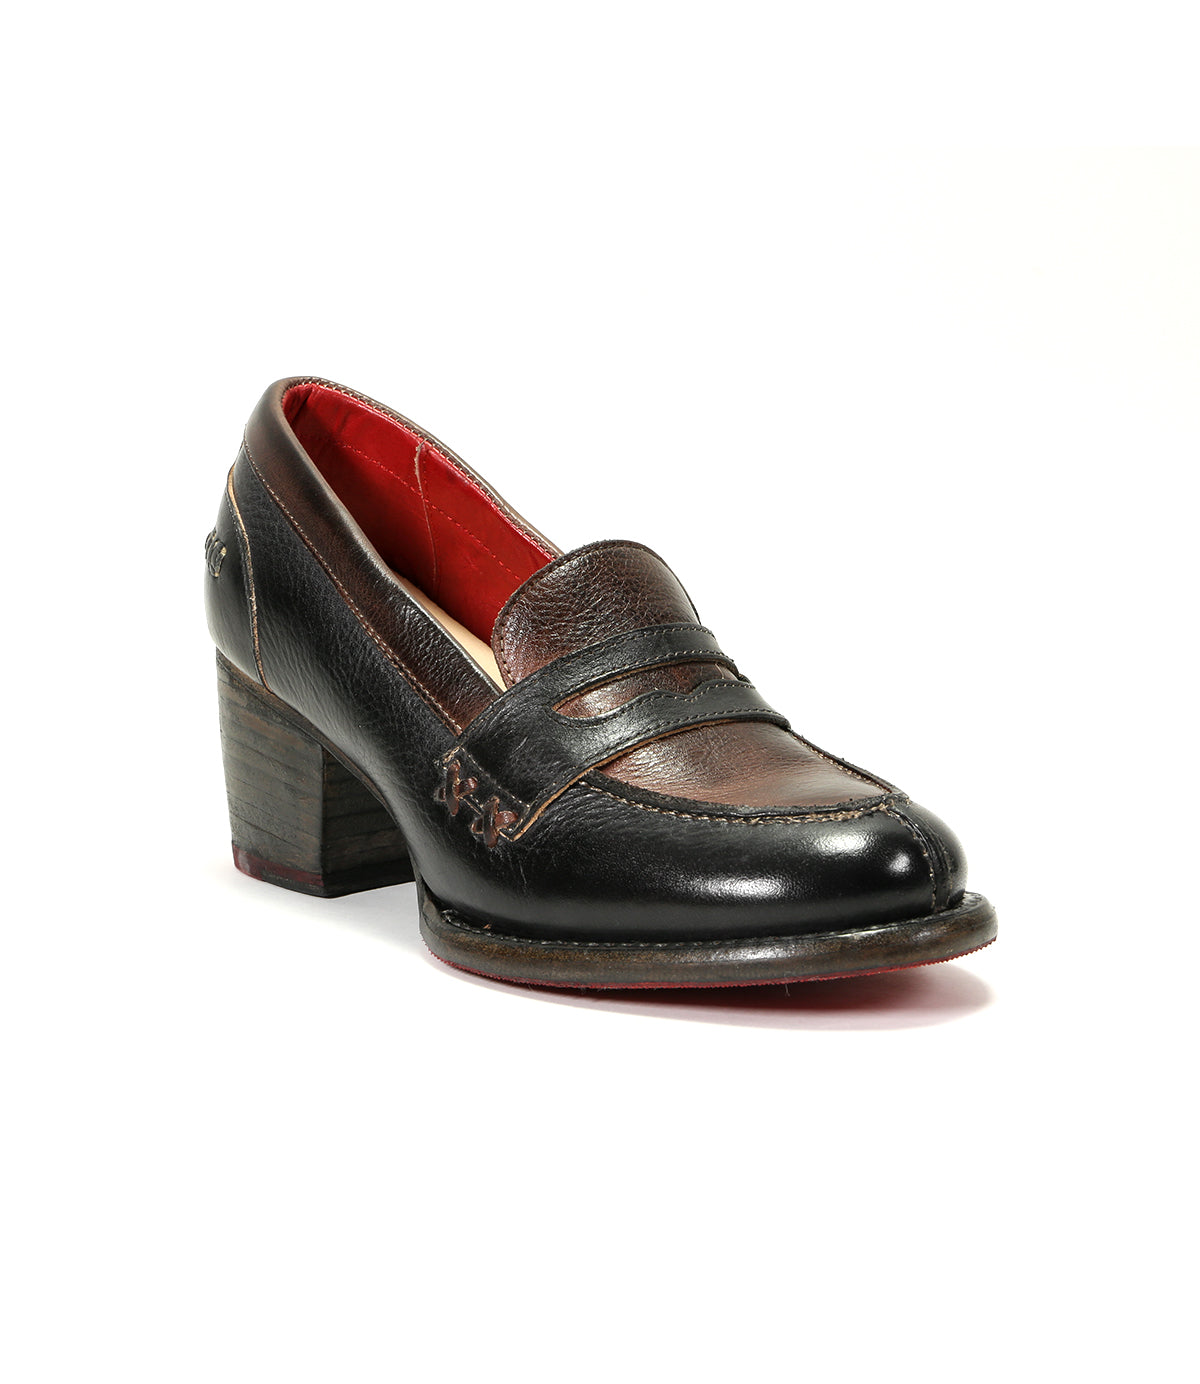 Elevate your shoe game with these sleek women's Liberty black and red loafers from Bed Stu, featuring a stylish wooden heel. Perfect for adding a touch of sophistication to your office attire.